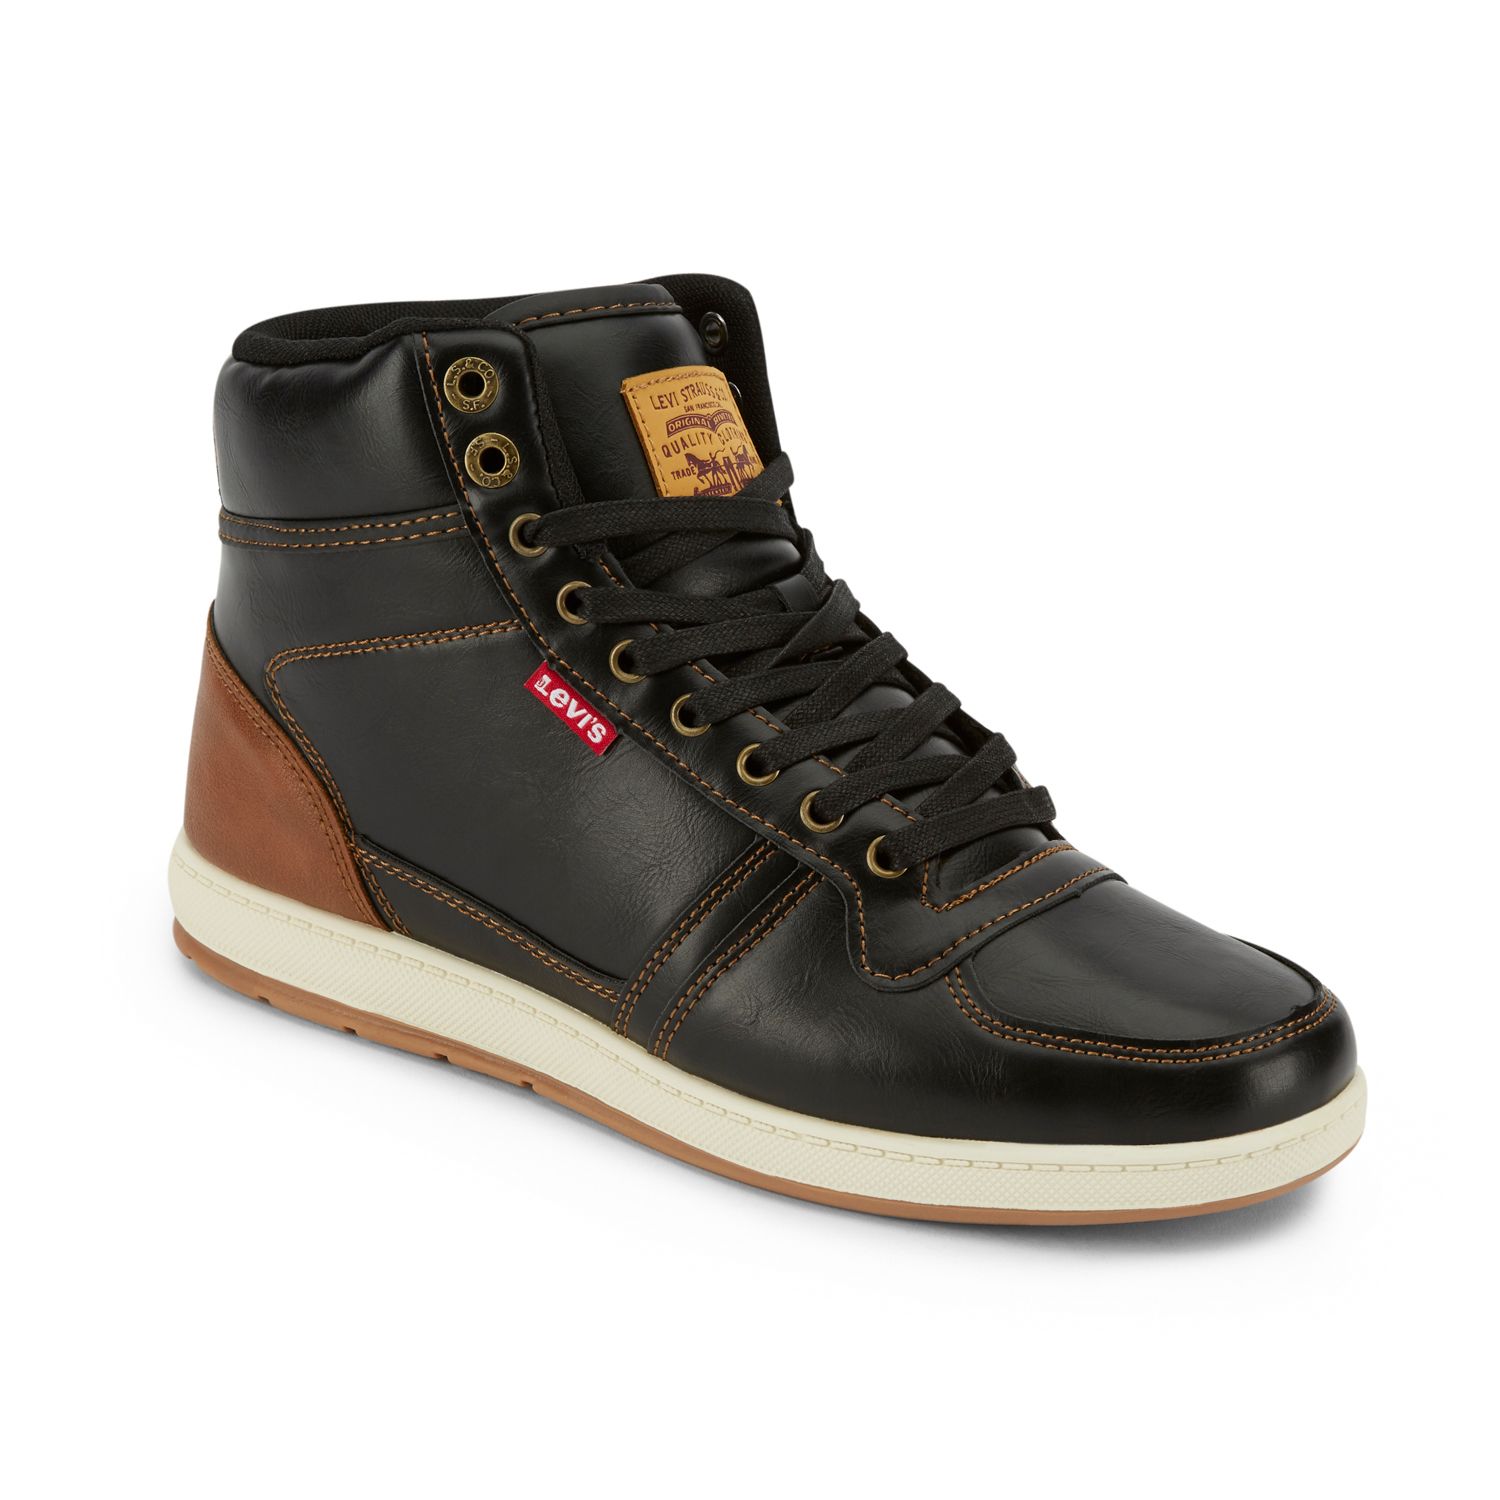 Image for Levi's Stanton Men's High Top Shoes at Kohl's.